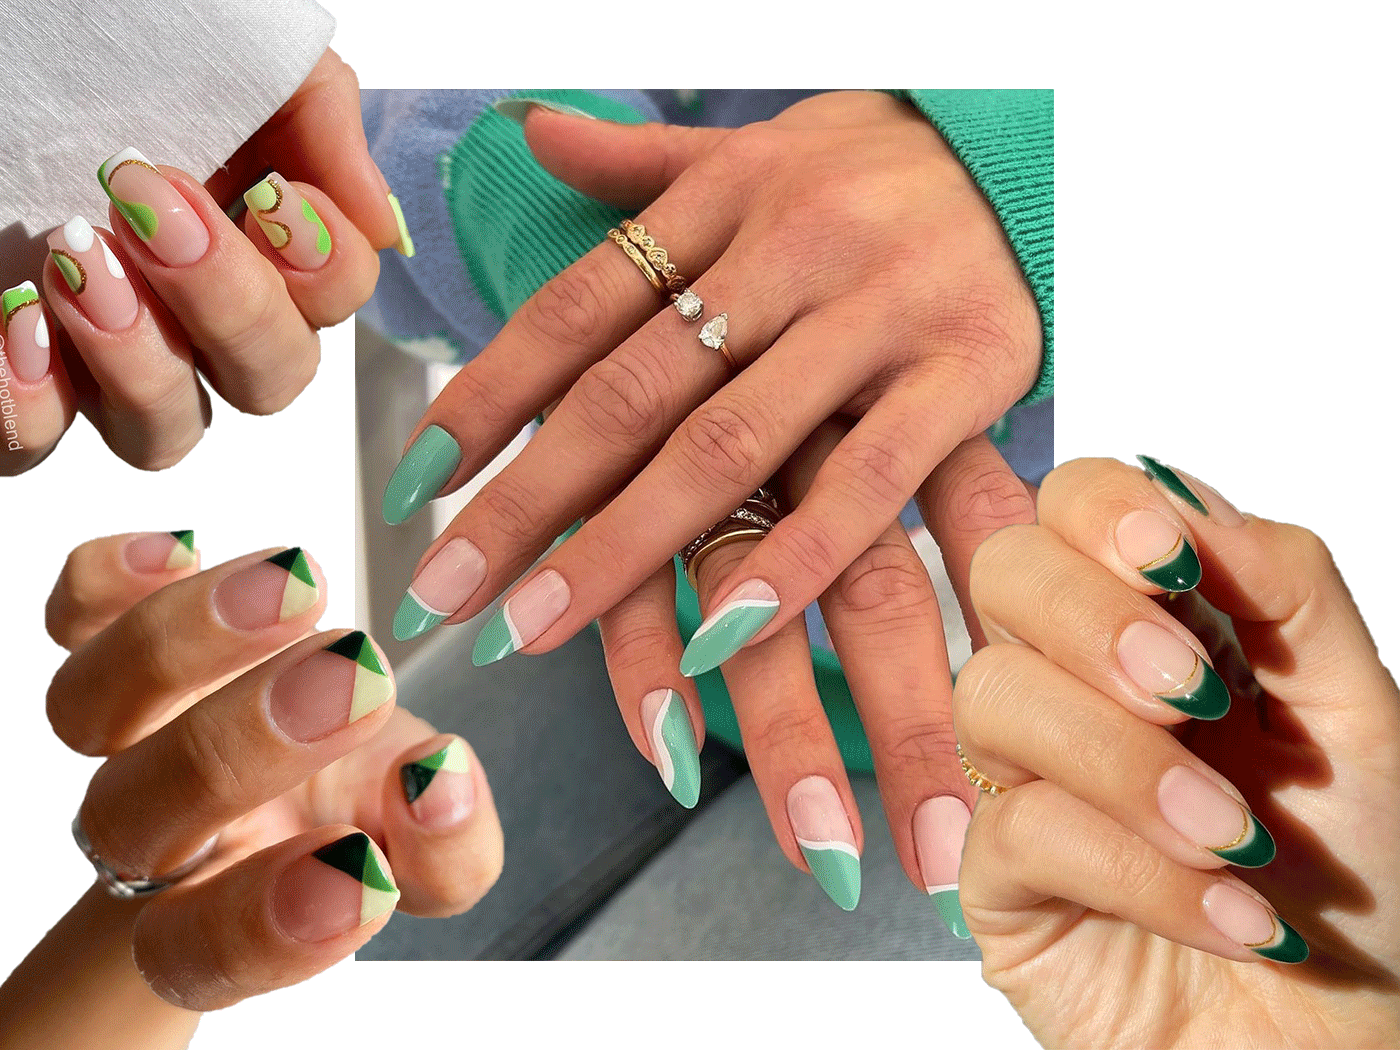 8. Celebrity nail artists share their tips for perfecting pointy nail designs like Rihanna - wide 10